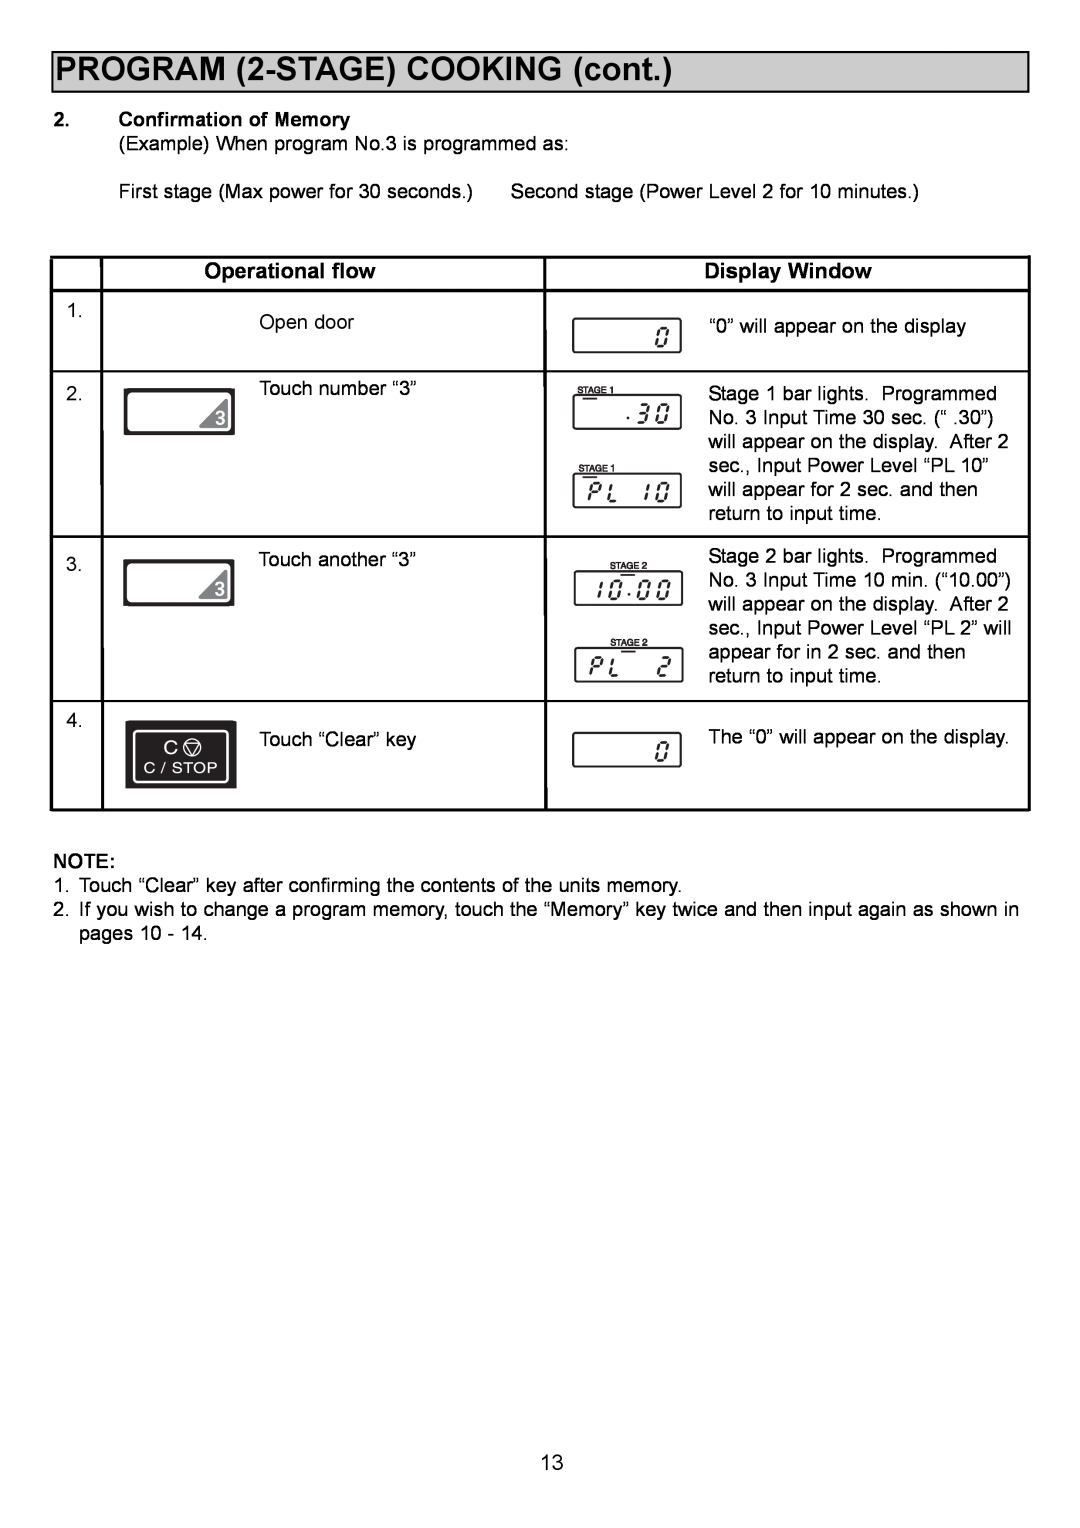 Sanyo EM-S1000 instruction manual PROGRAM 2-STAGE COOKING cont, Confirmation of Memory 